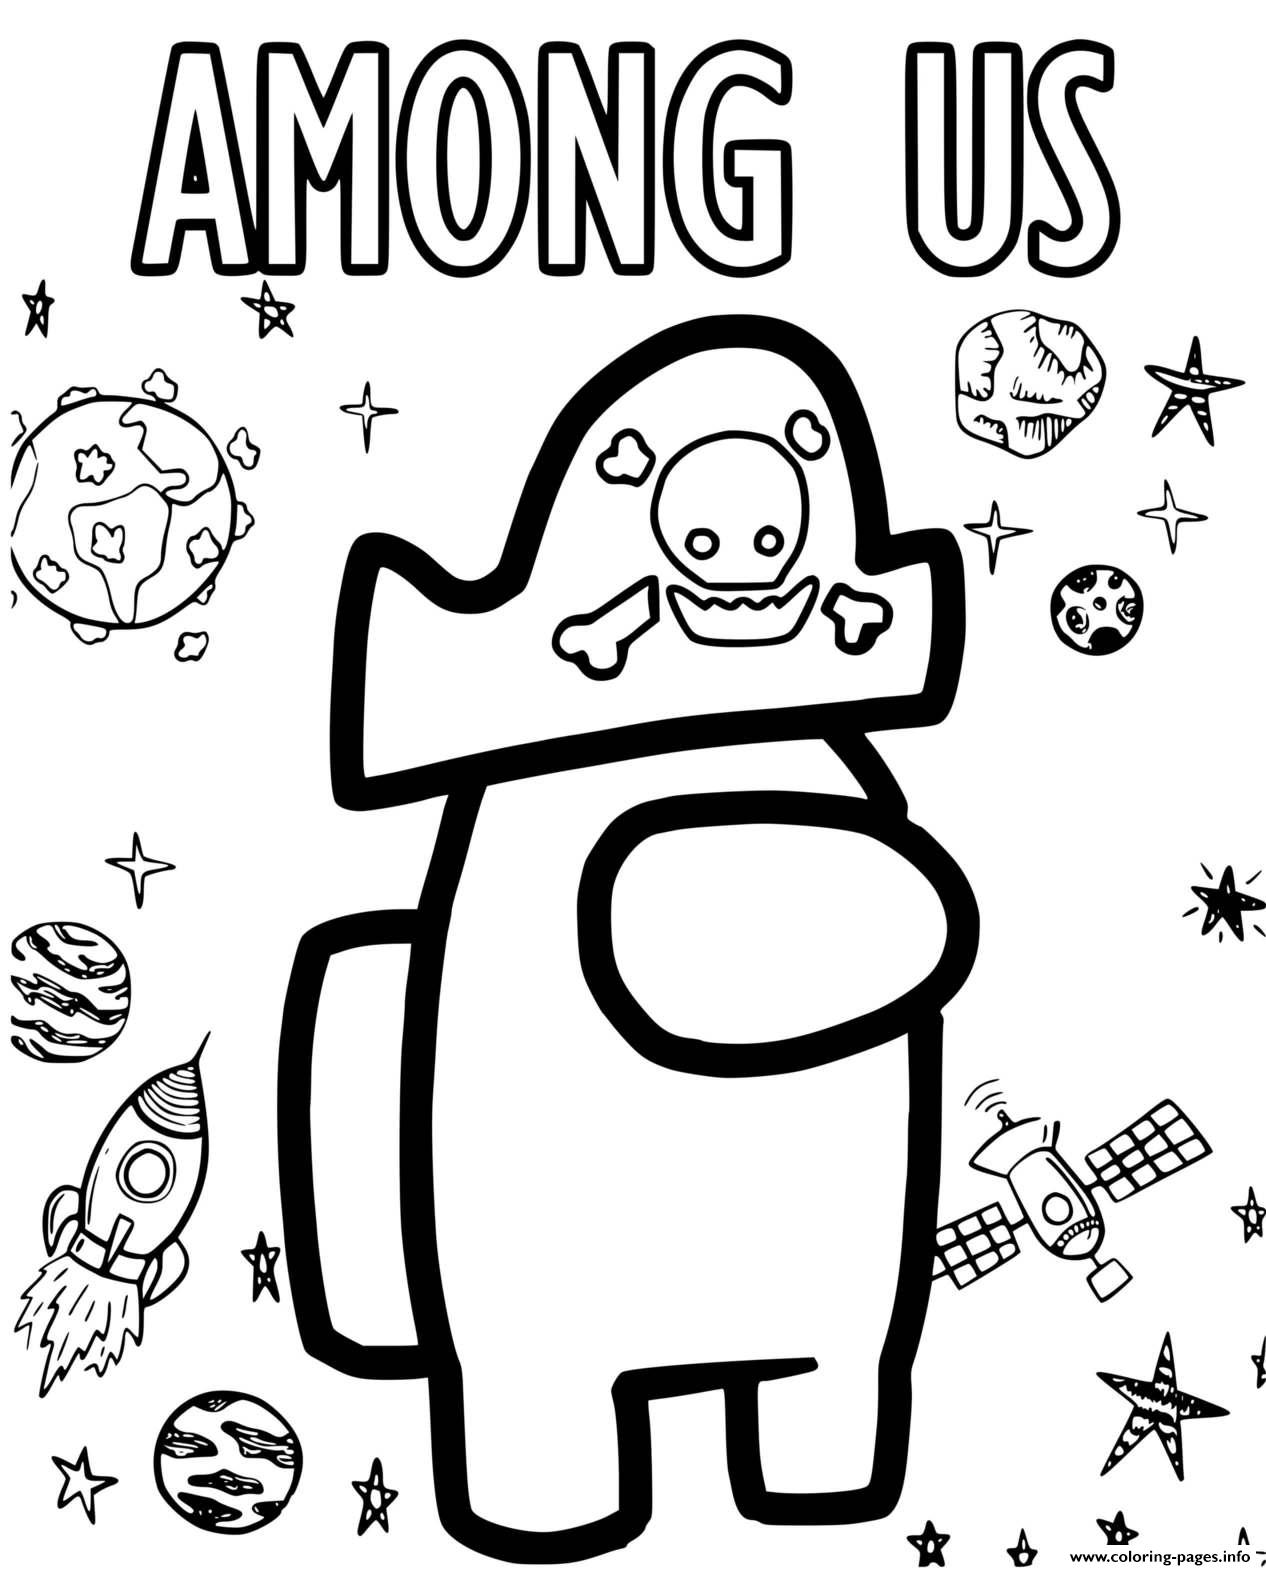 Among Us Coloring Pages Printable : - Injustice gods among us superman